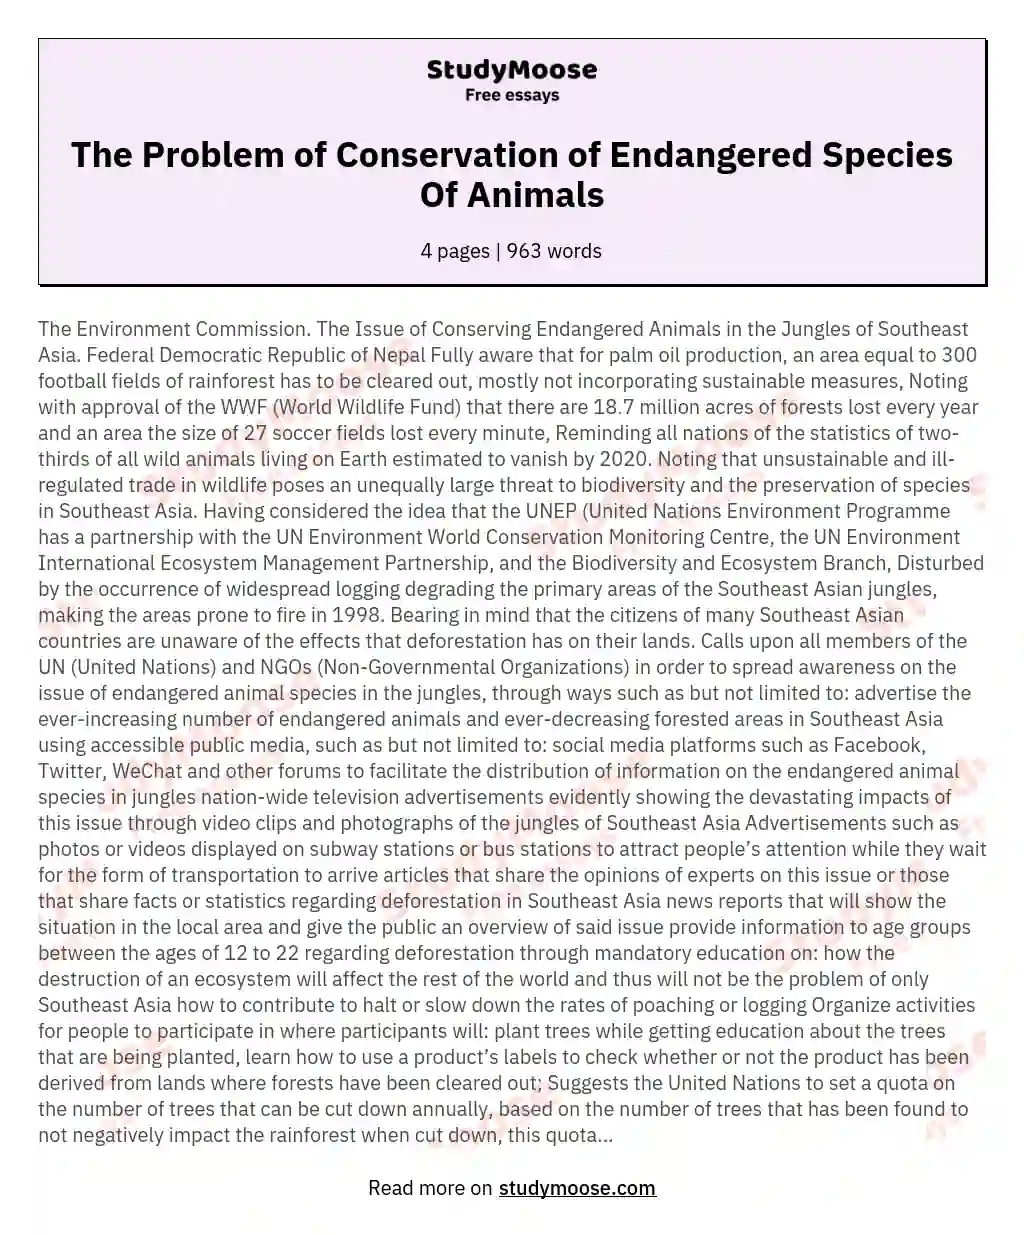 The Problem of Conservation of Endangered Species Of Animals essay